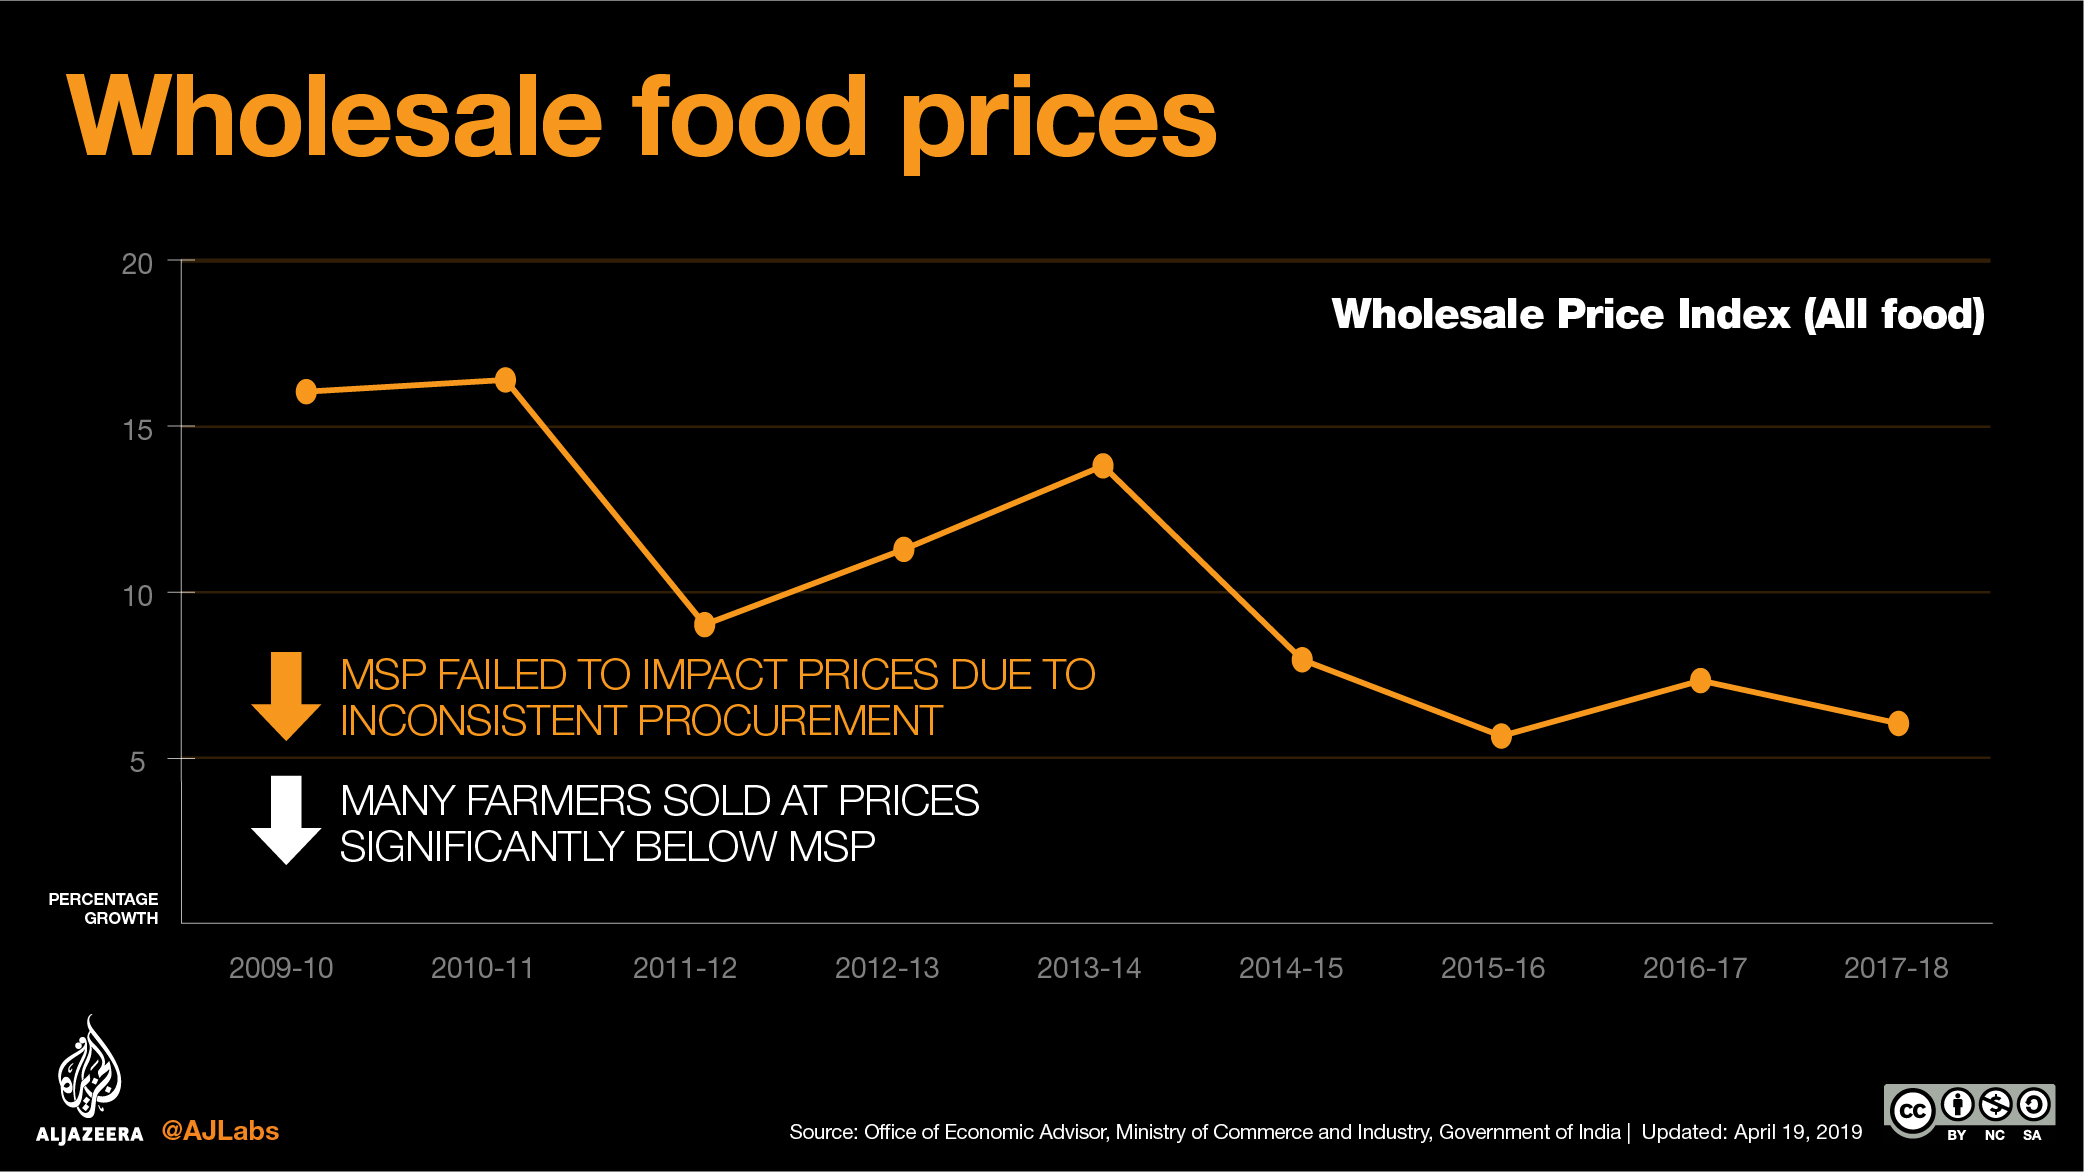 Farmers claim that the price they get for their produce has remained unchanged in recent years. This is consistent with markers such as the Wholesale Price Index (WPI) for primary food articles, an indicator of how much farmers are actually being paid for their produce. WPI has been declining or stagnant since 2013-2014.